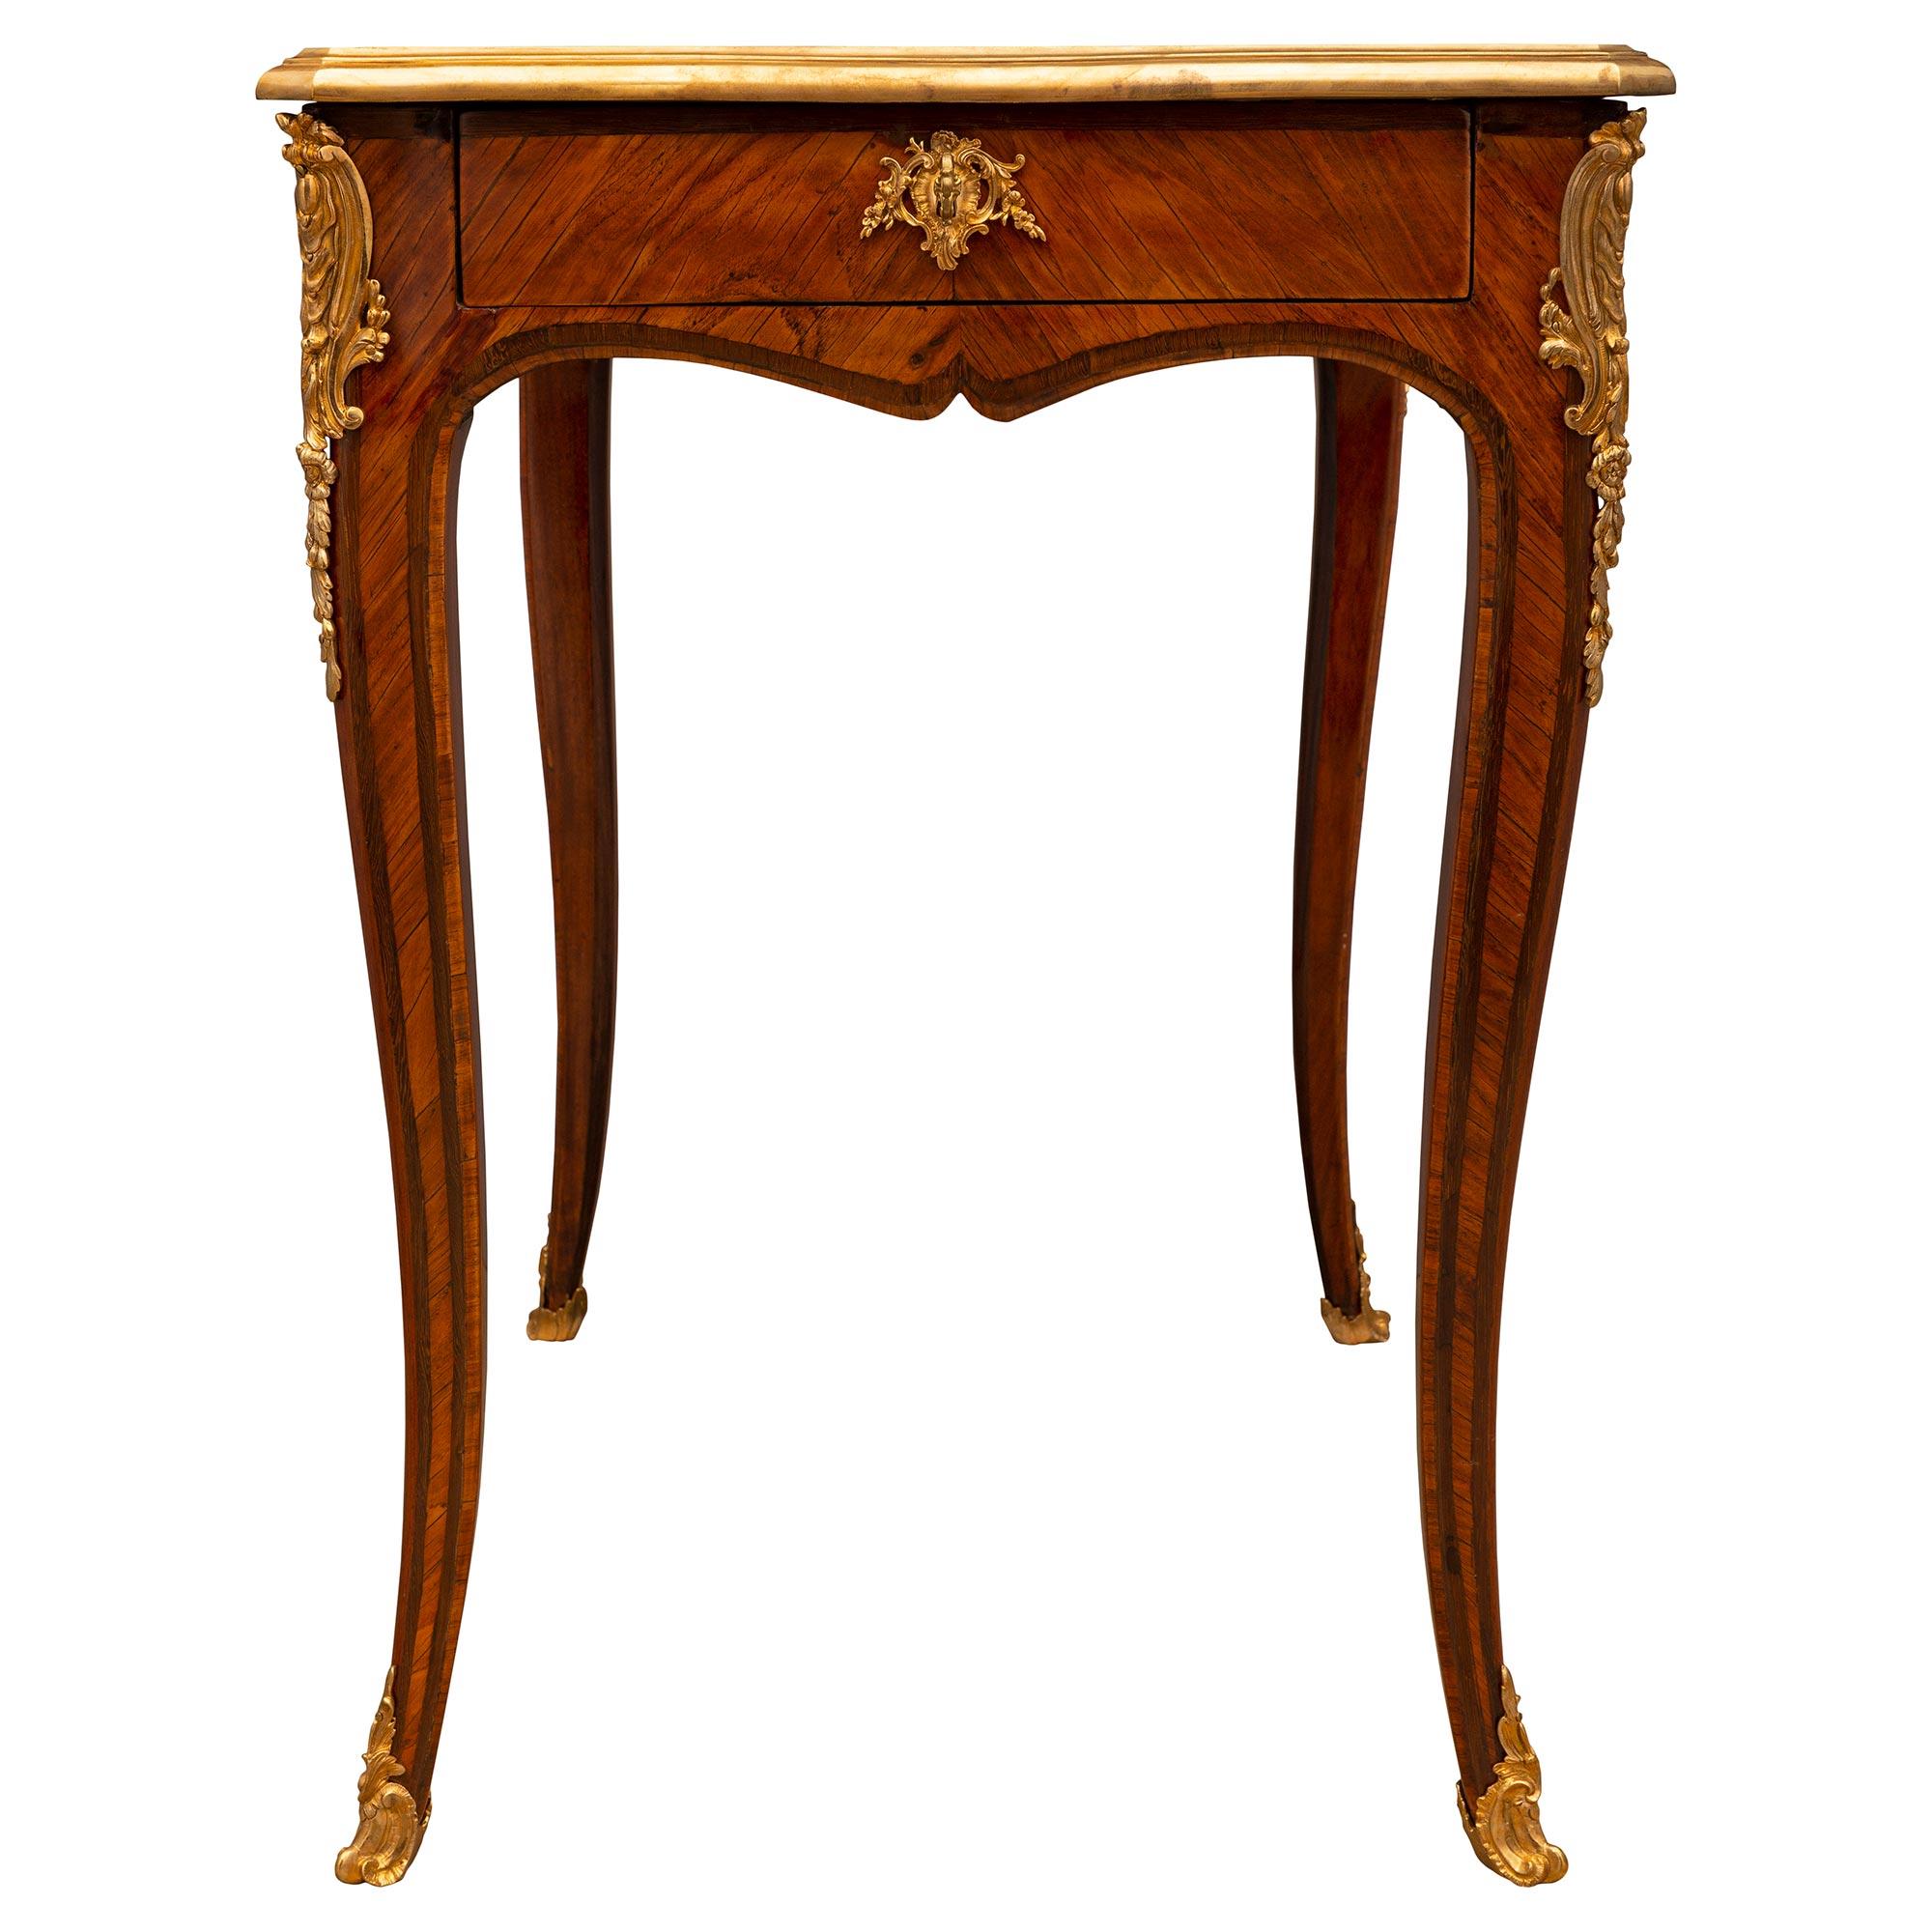 Ormolu French 18th Century Louis XV Period Side Table/Desk For Sale